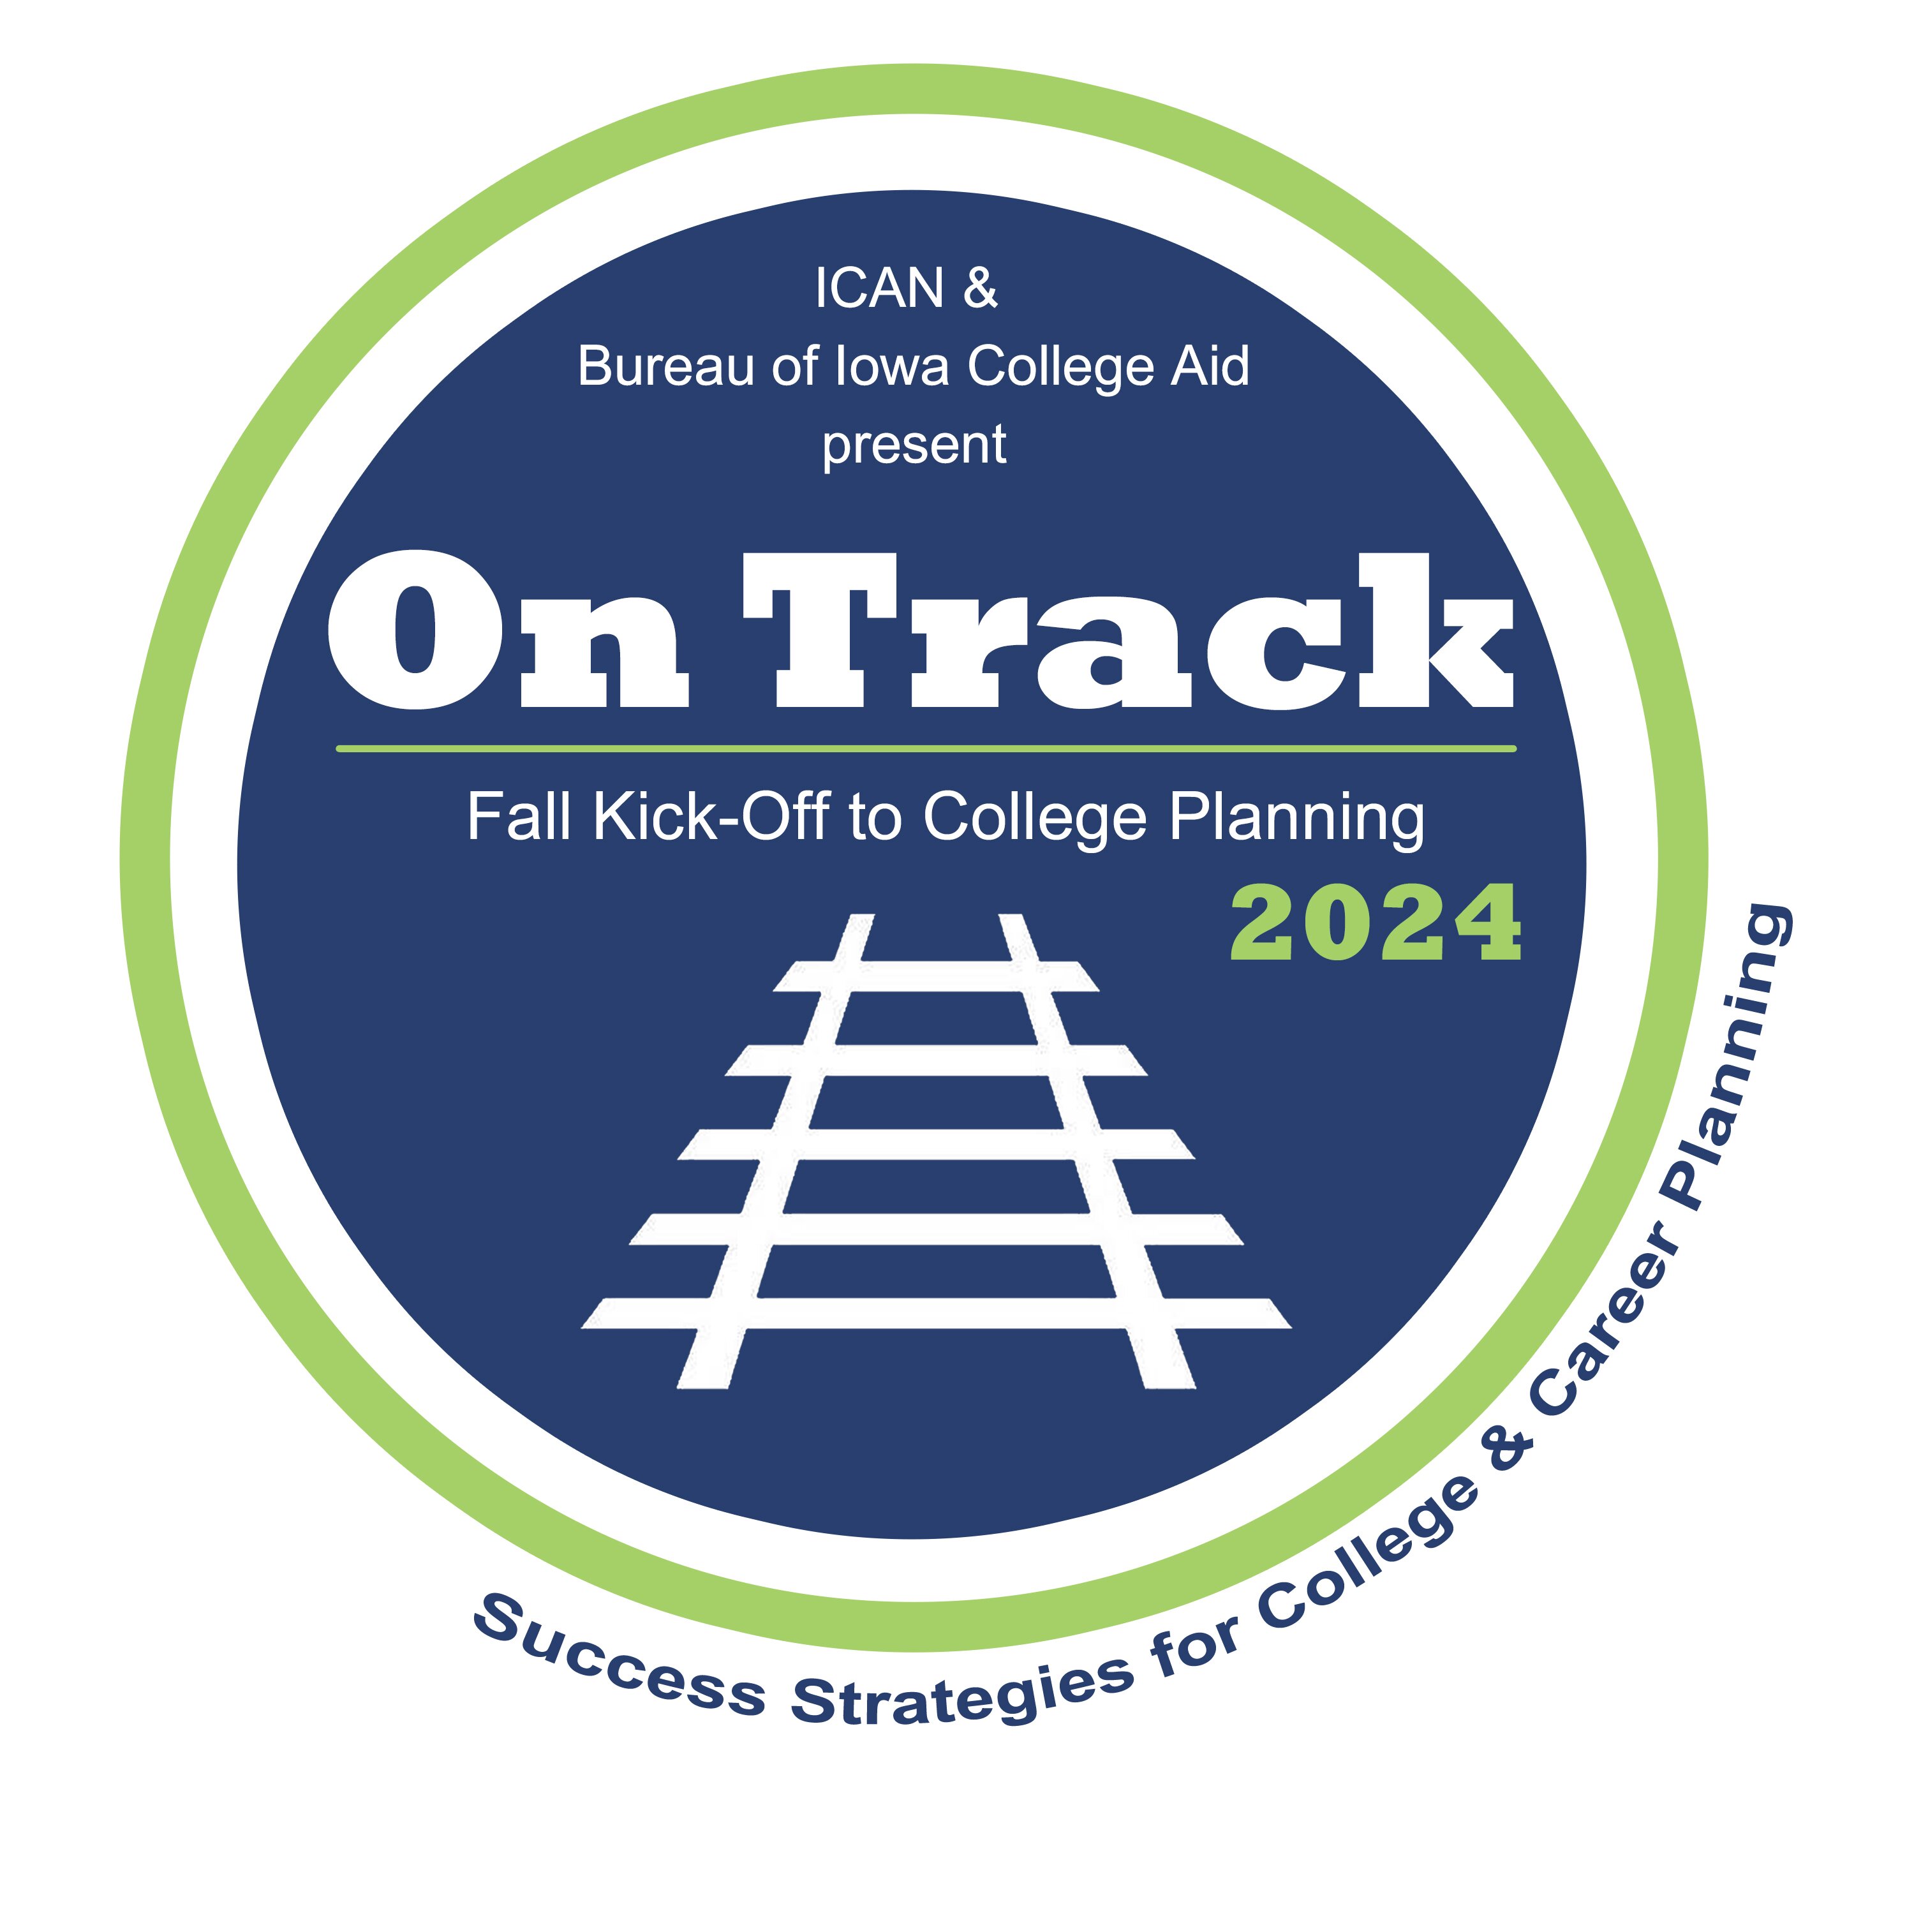 ICAN Presents Back on Track Fall 2021 Kick-Off